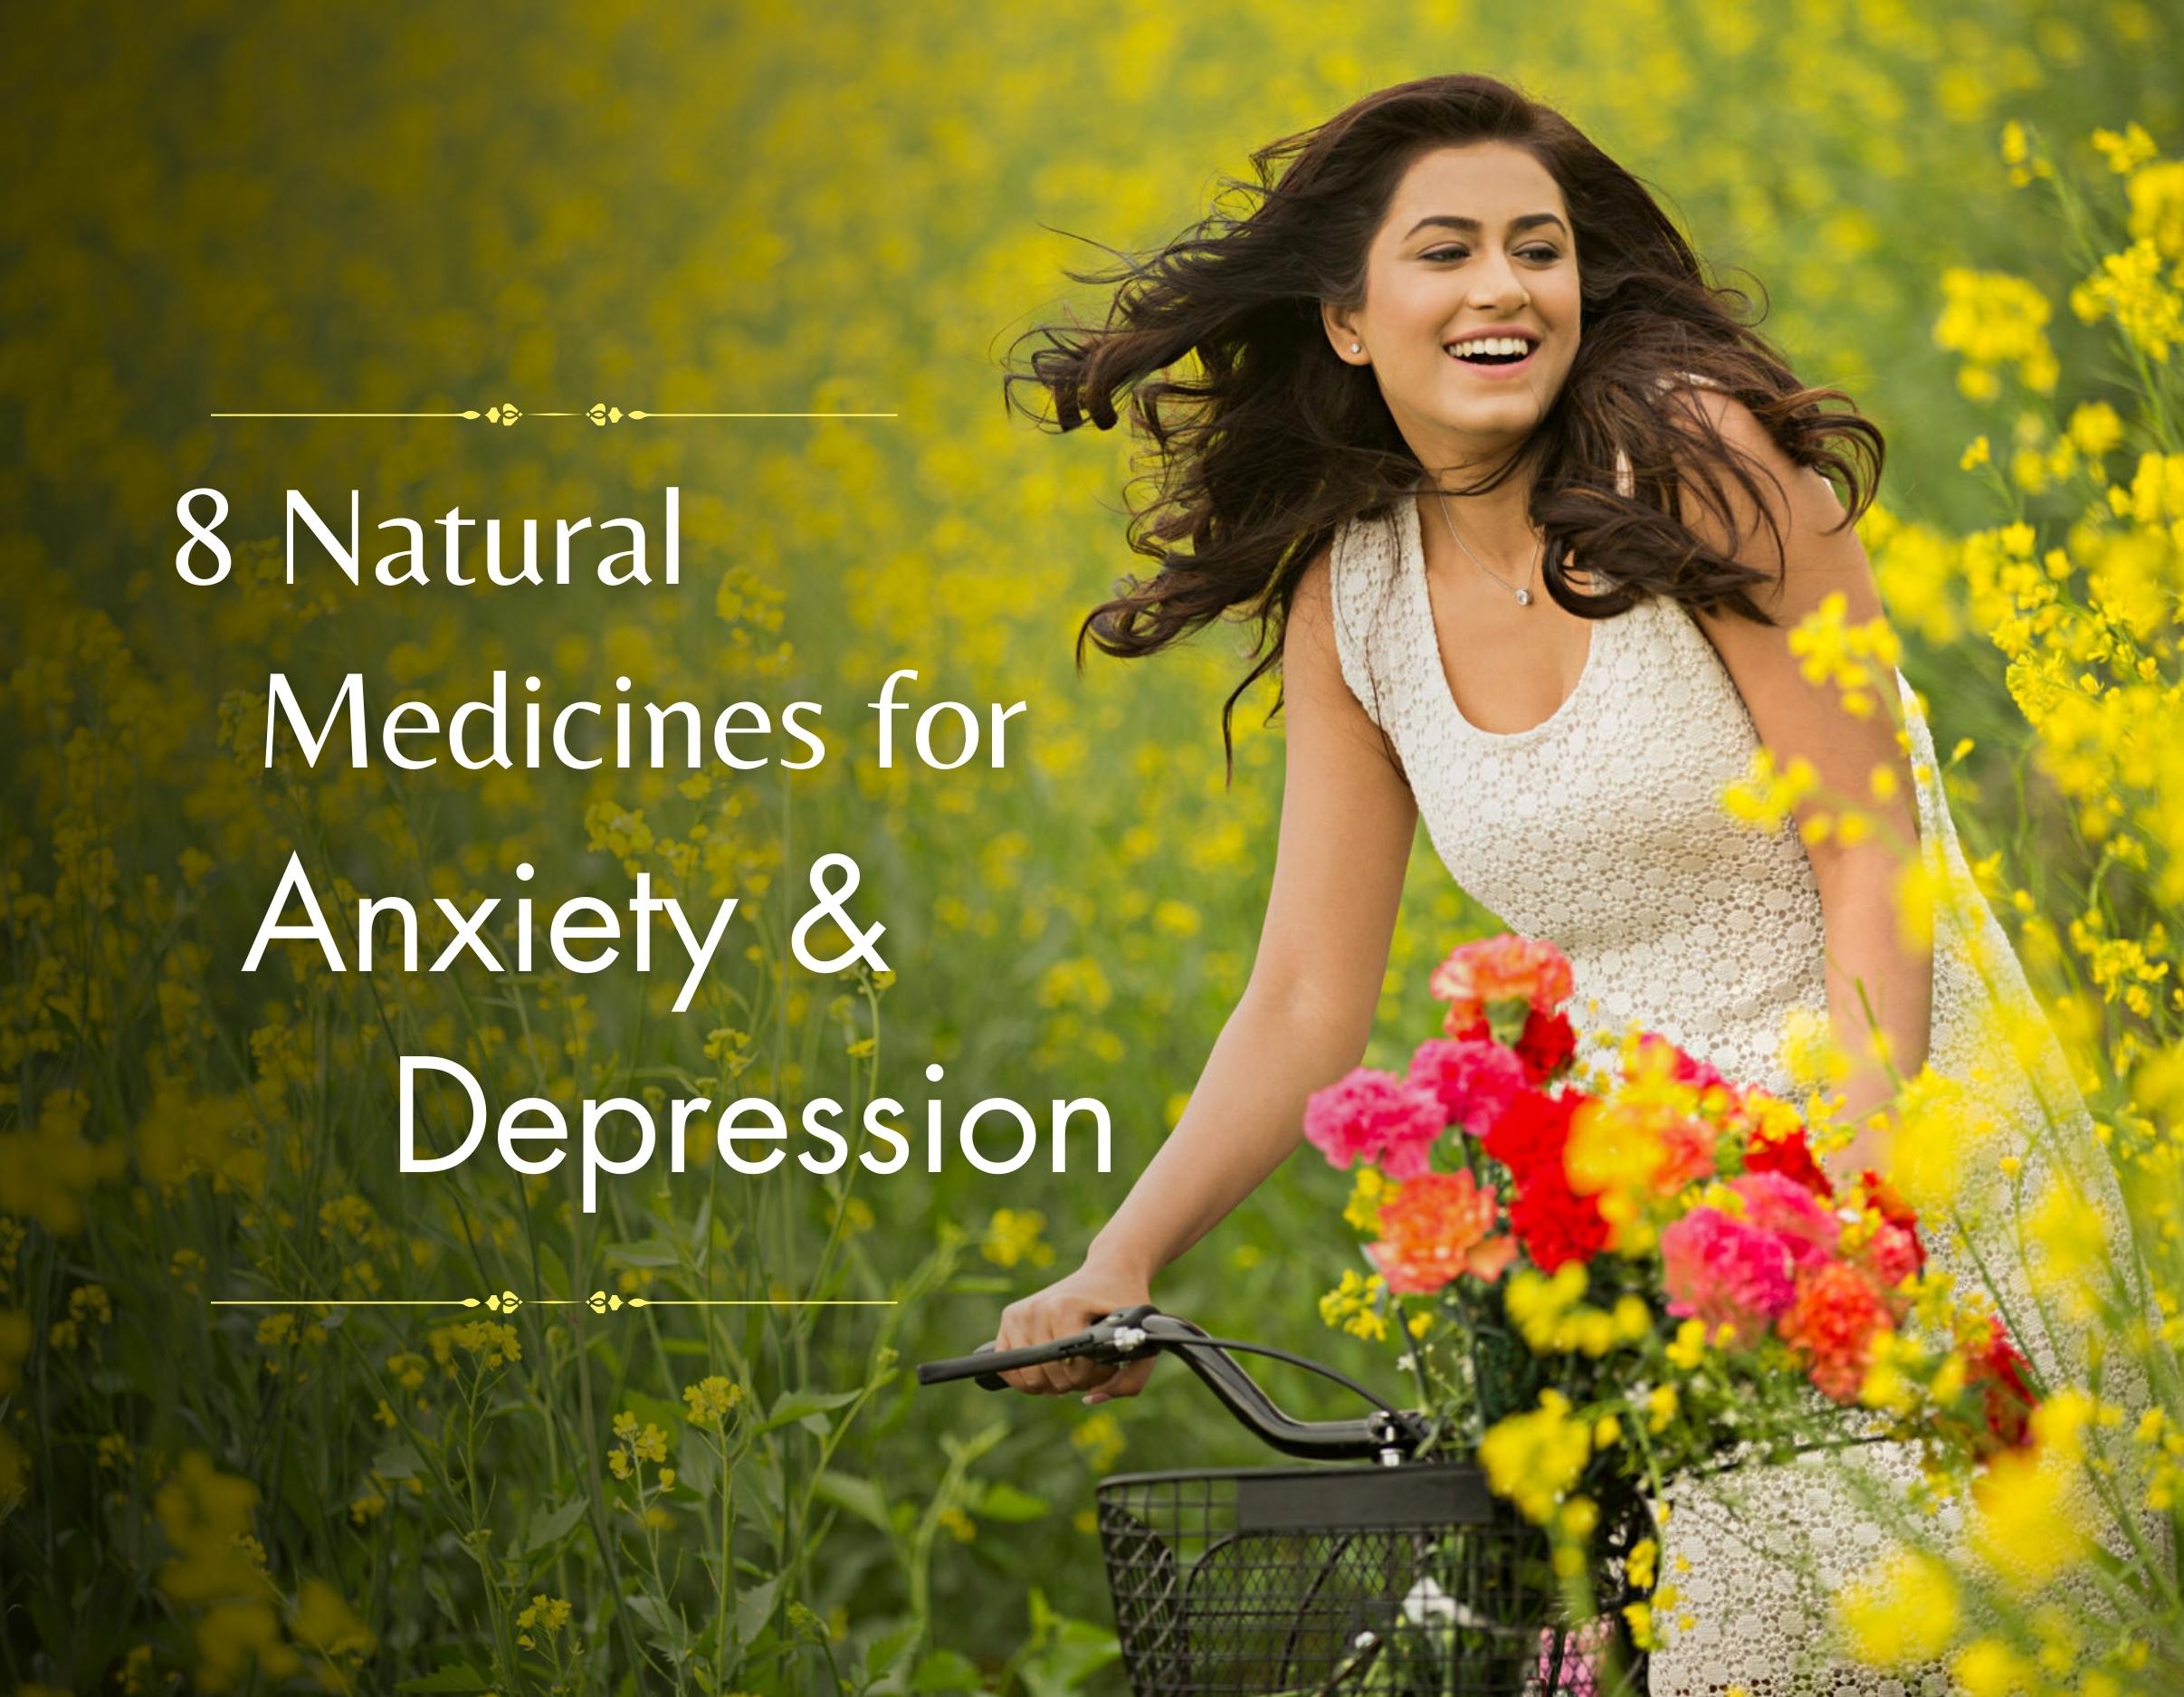 Natural remedies for anxiety and depression